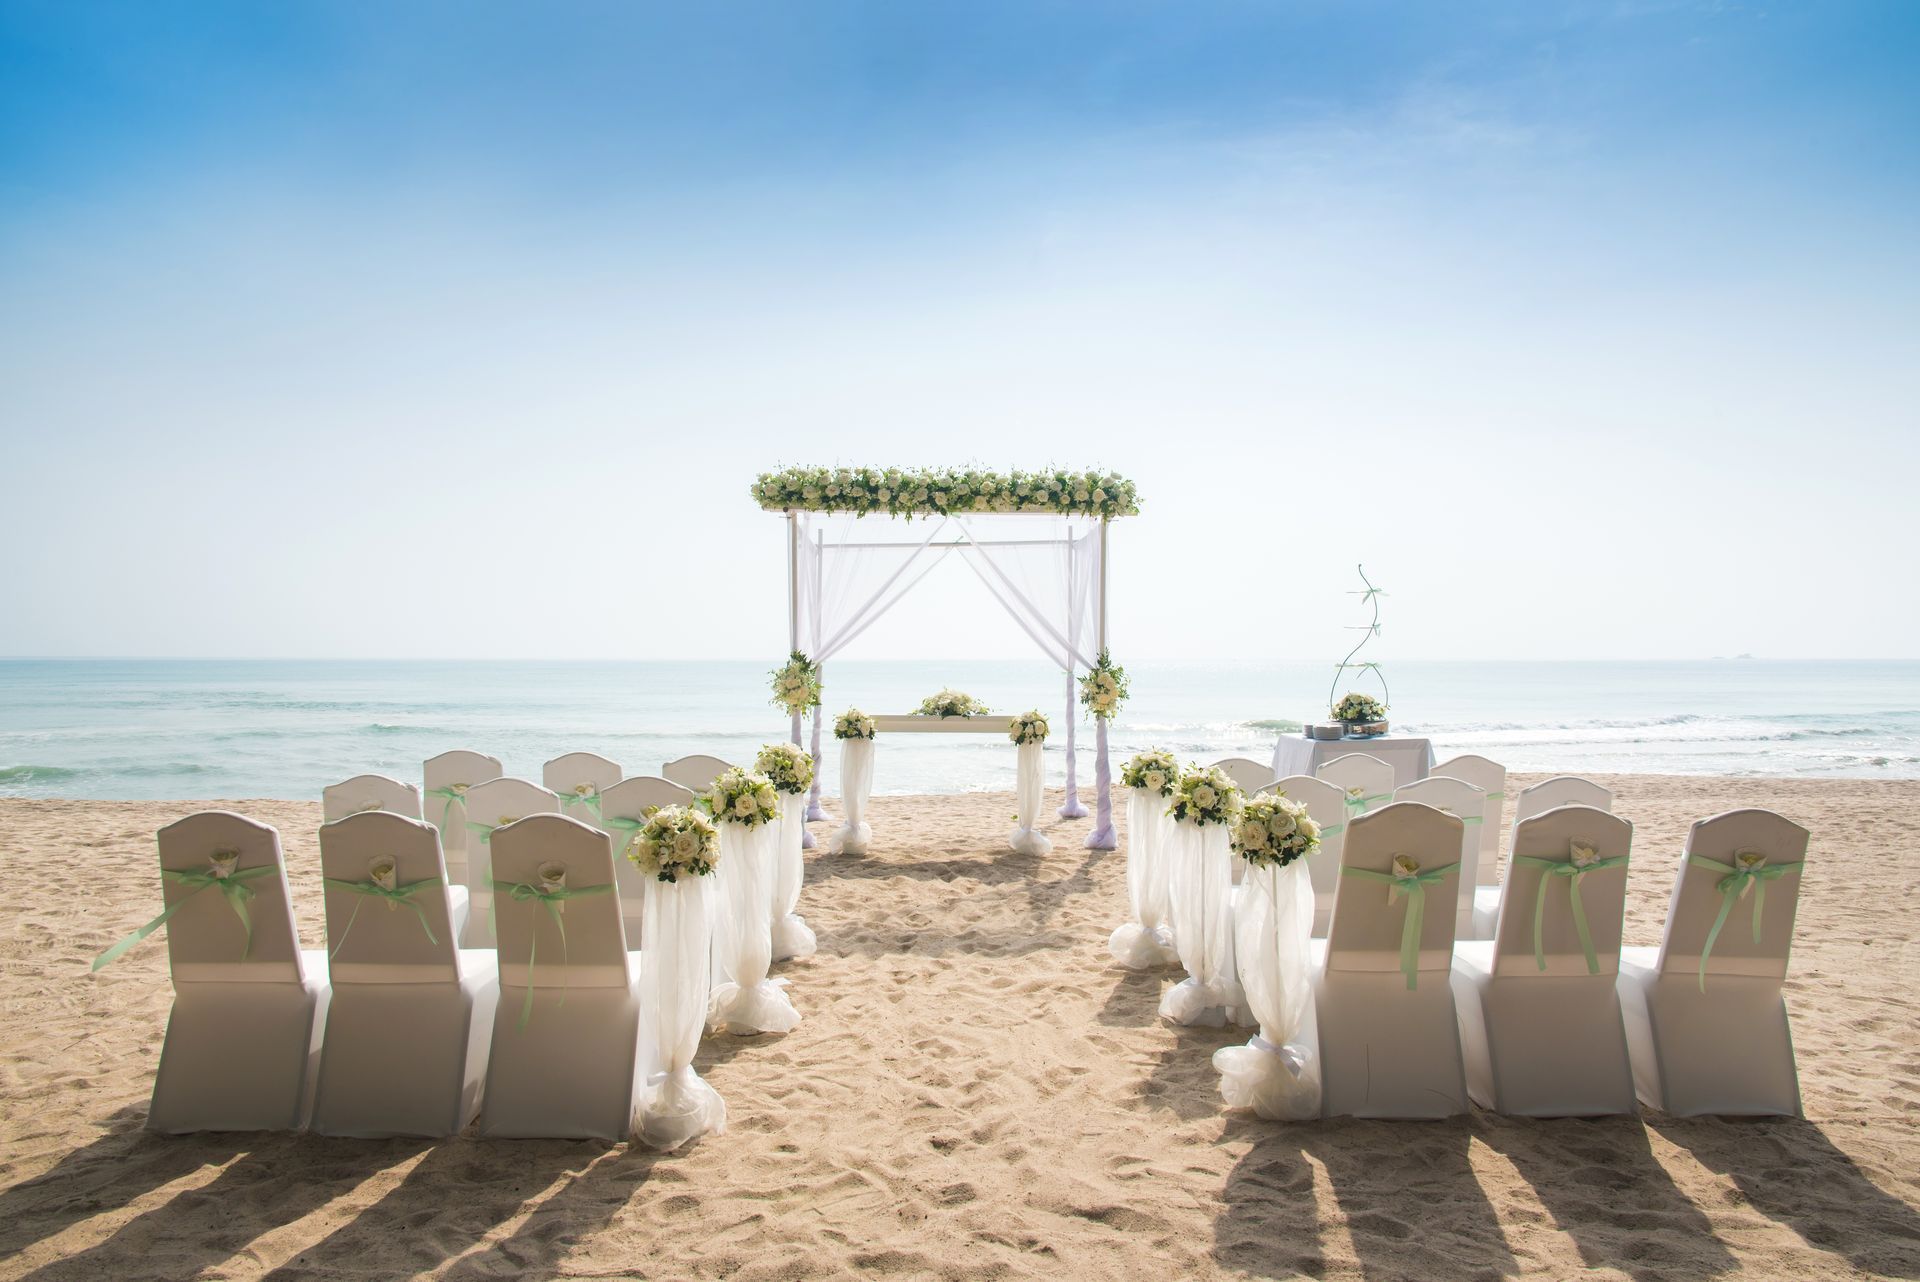 A wedding ceremony is taking place on the beach.